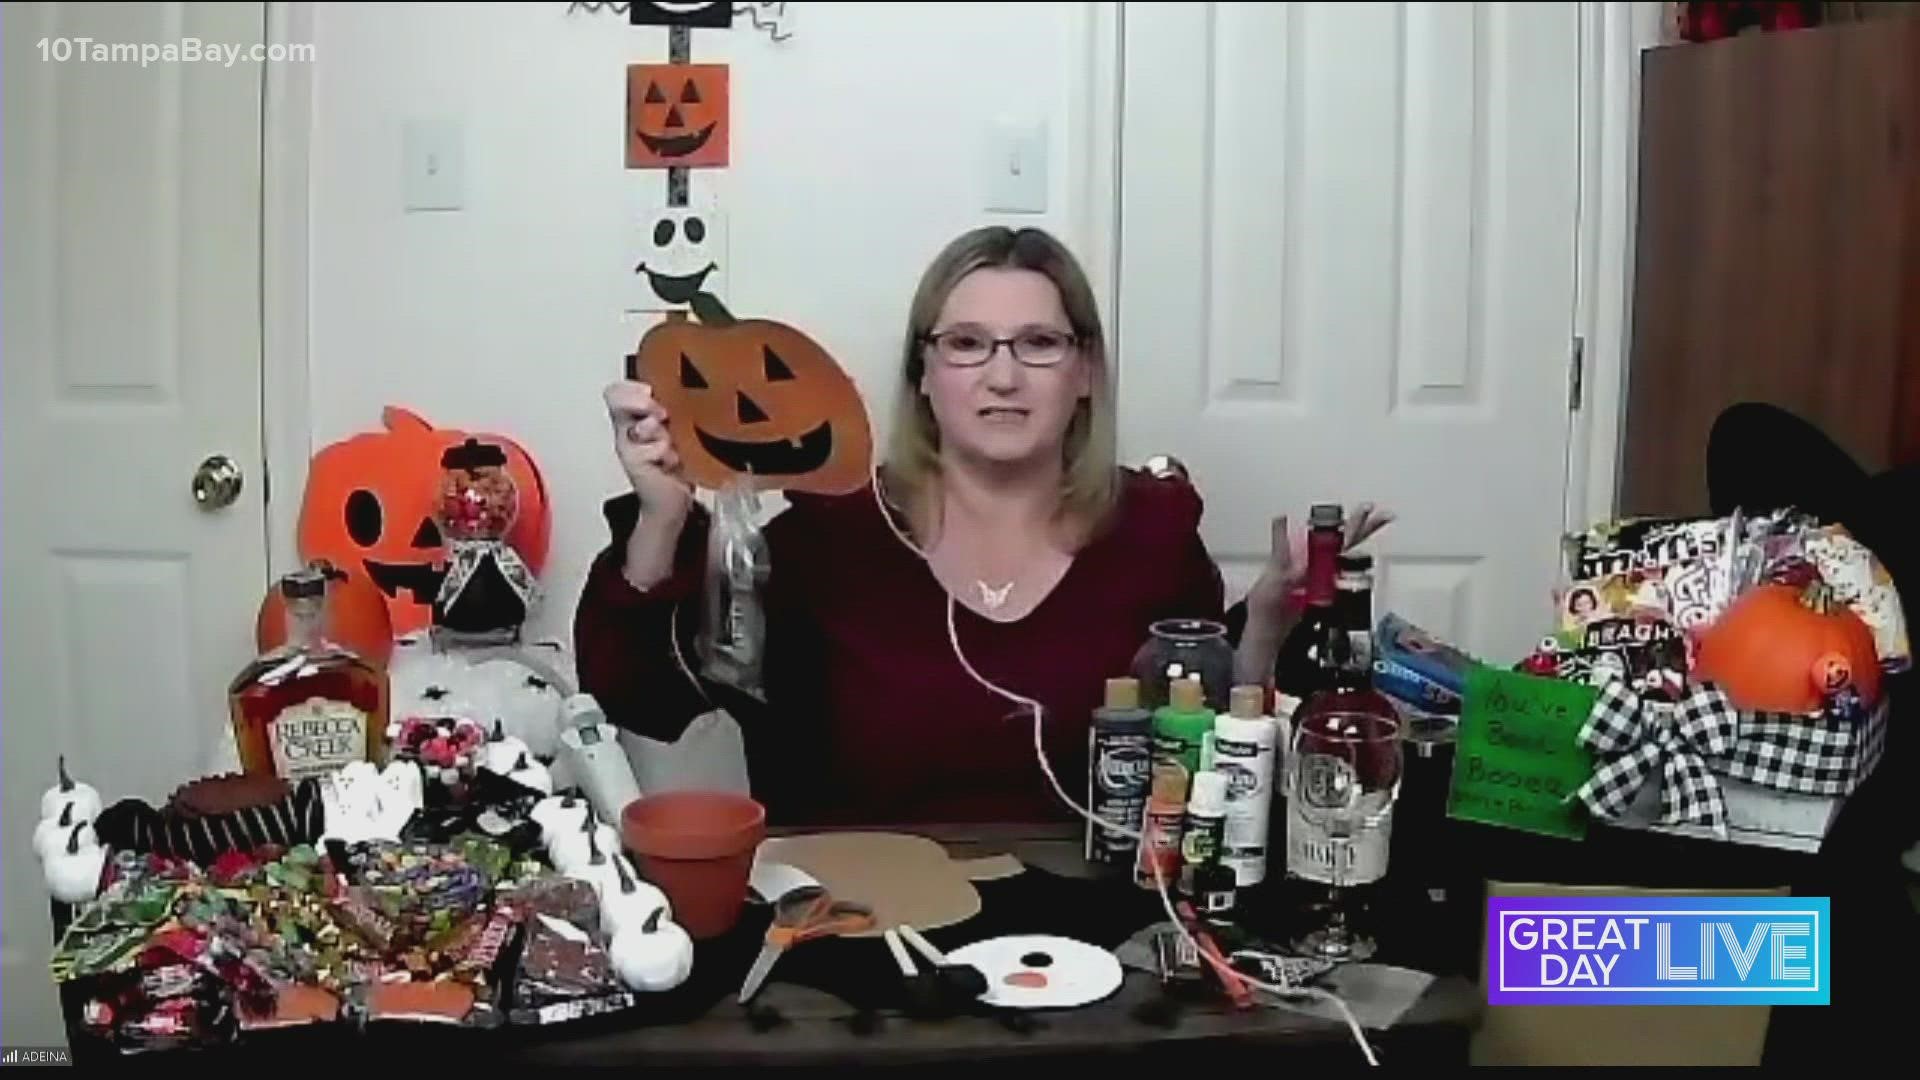 From Boo’d baskets to spooky cocktails, Great Day Live found out how to spice up Halloween.